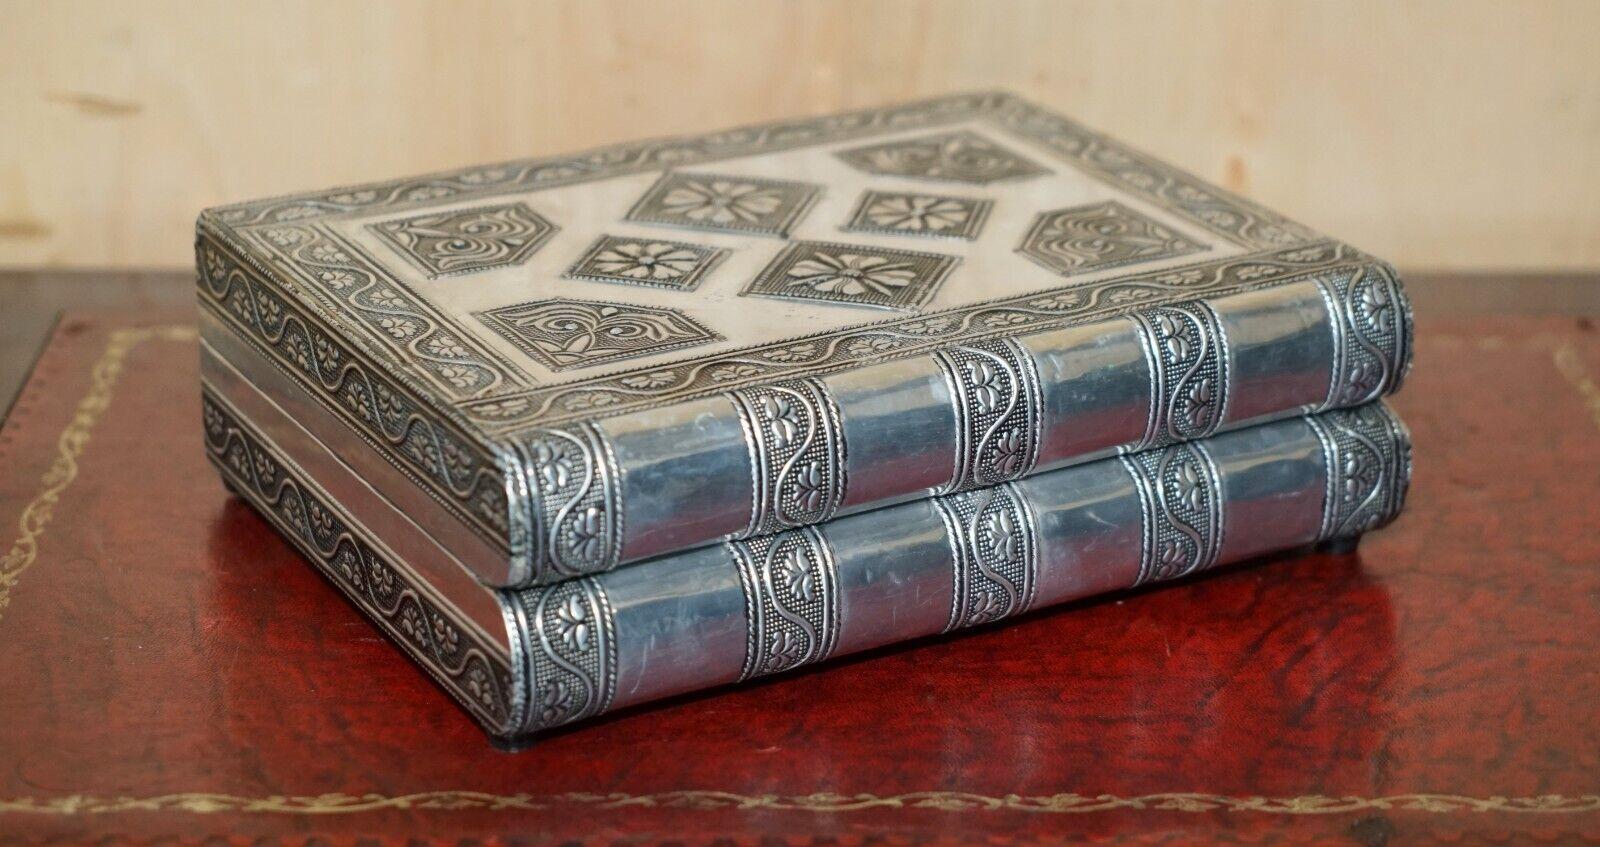 Royal House Antiques

Royal House Antiques is delighted to offer for sale this very decorative Indian Silver, stack of books which opens up to reveal a hidden jewellery box

A very good looking and decorative piece, it looks to be unused and works